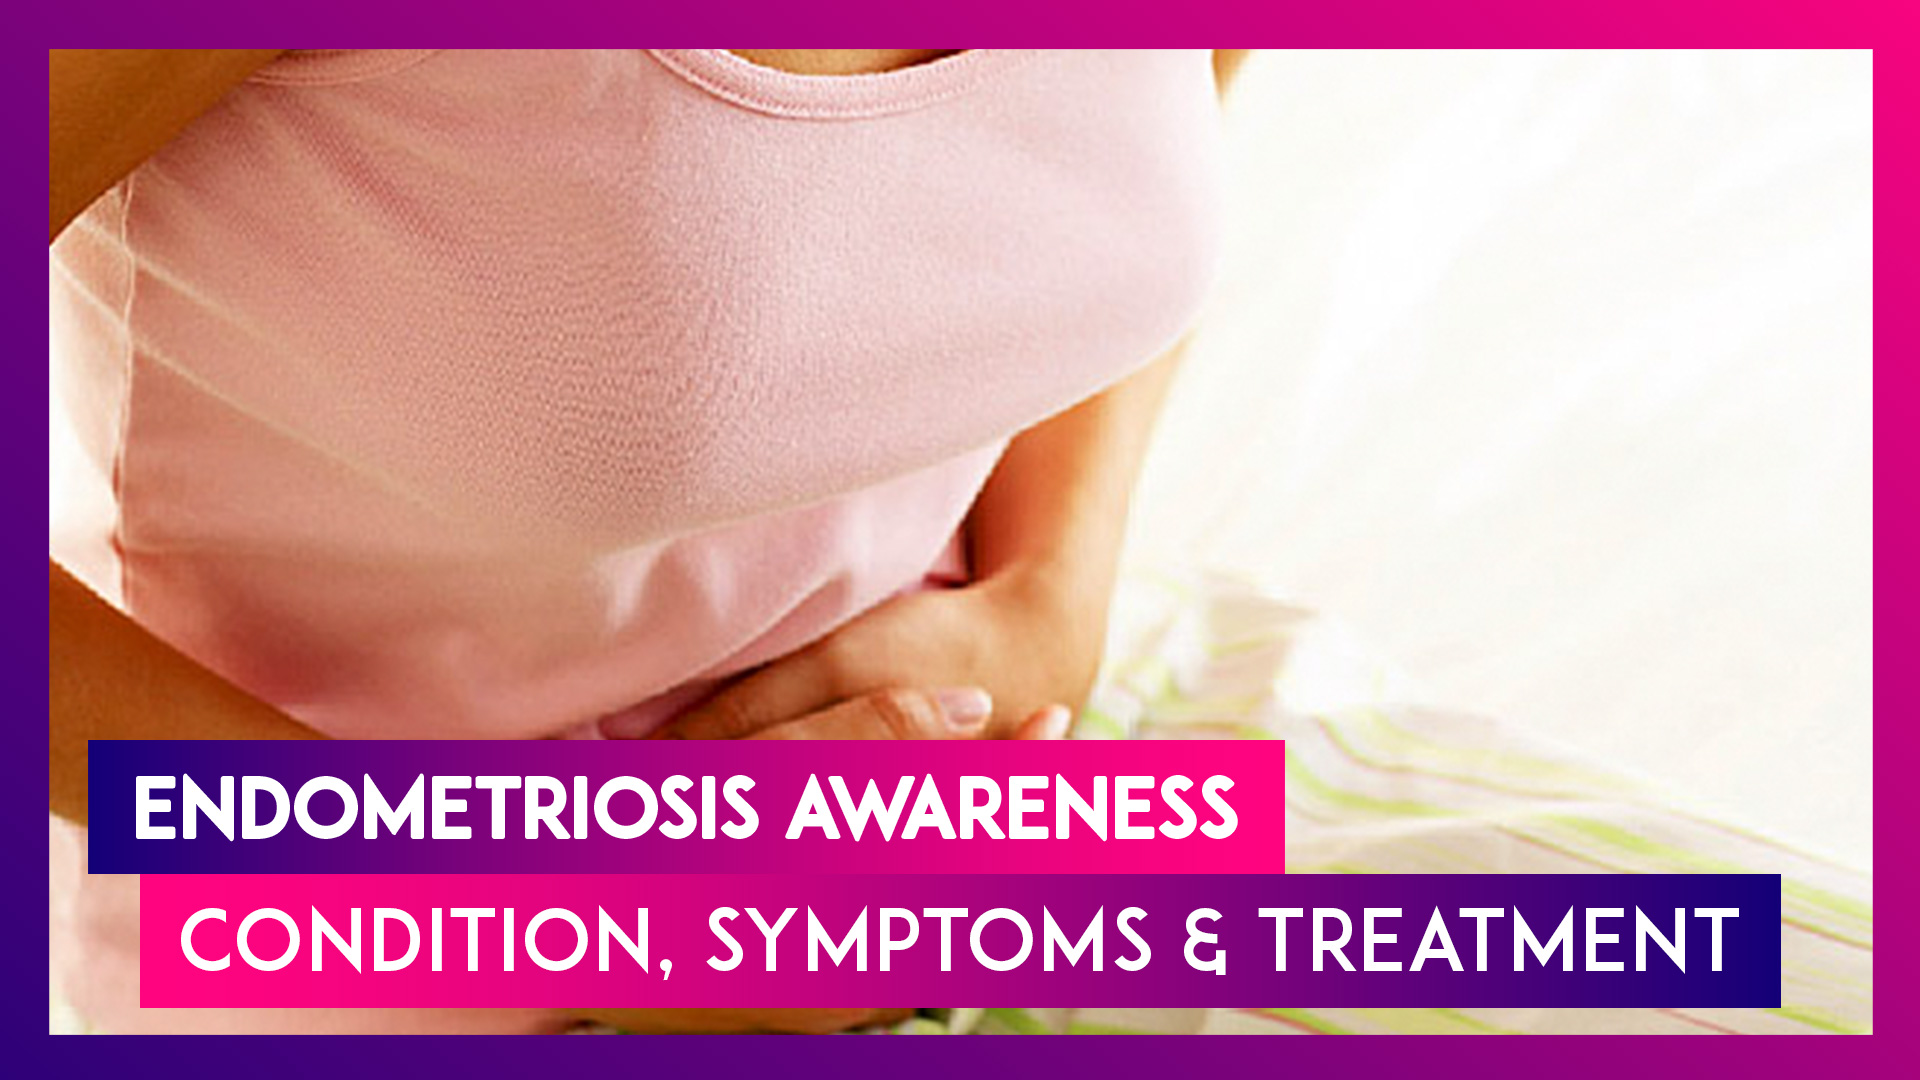 Endometriosis Awareness: What Is The Condition, Symptoms & Treatment, All You Need To Know